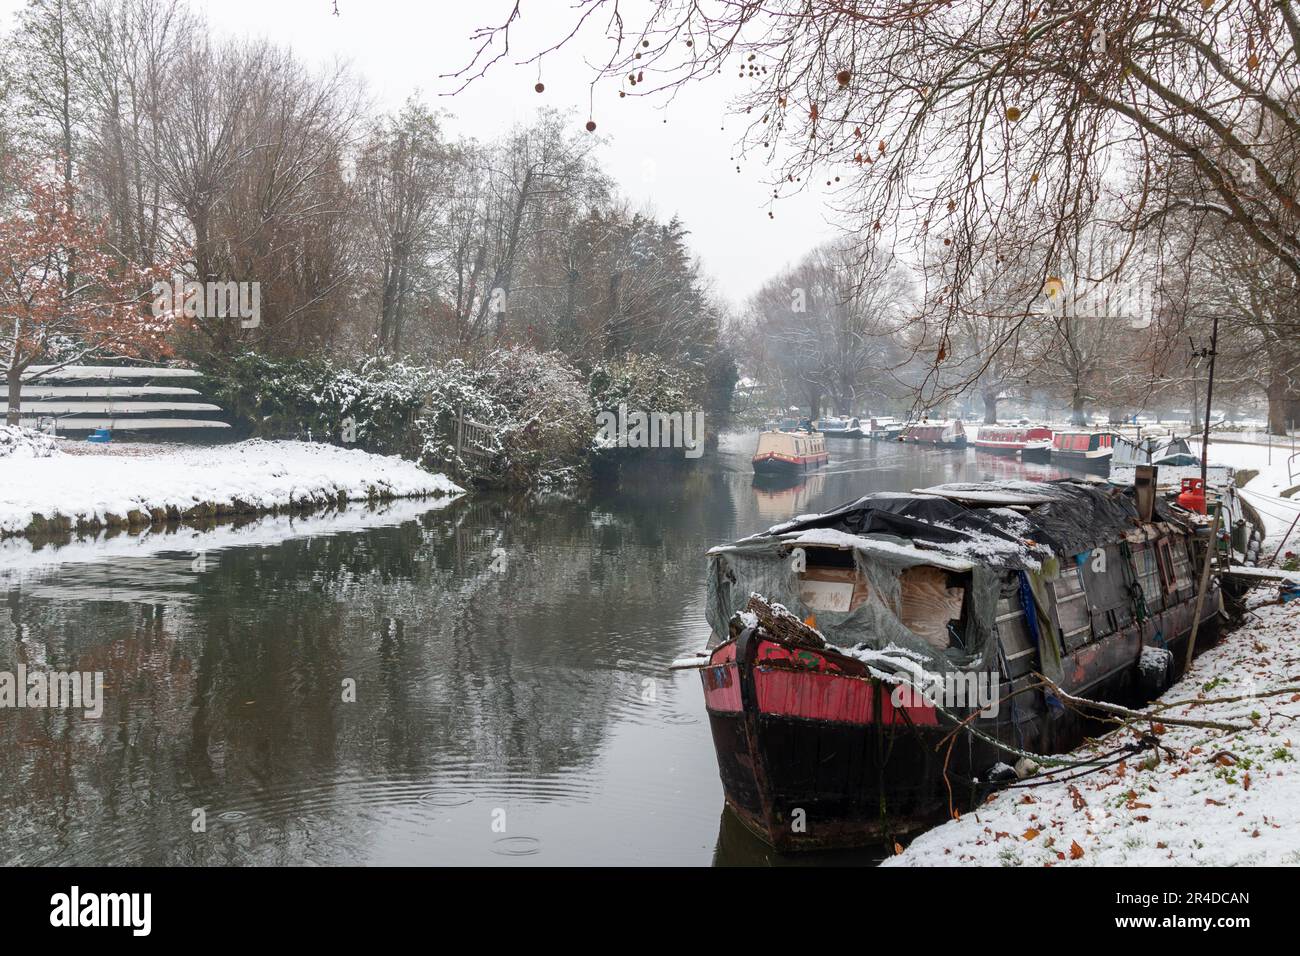 A narrowboat moored on the River Cam at Stourbridge Common, Cambridge, UK on a snowy, winter day. Stock Photo